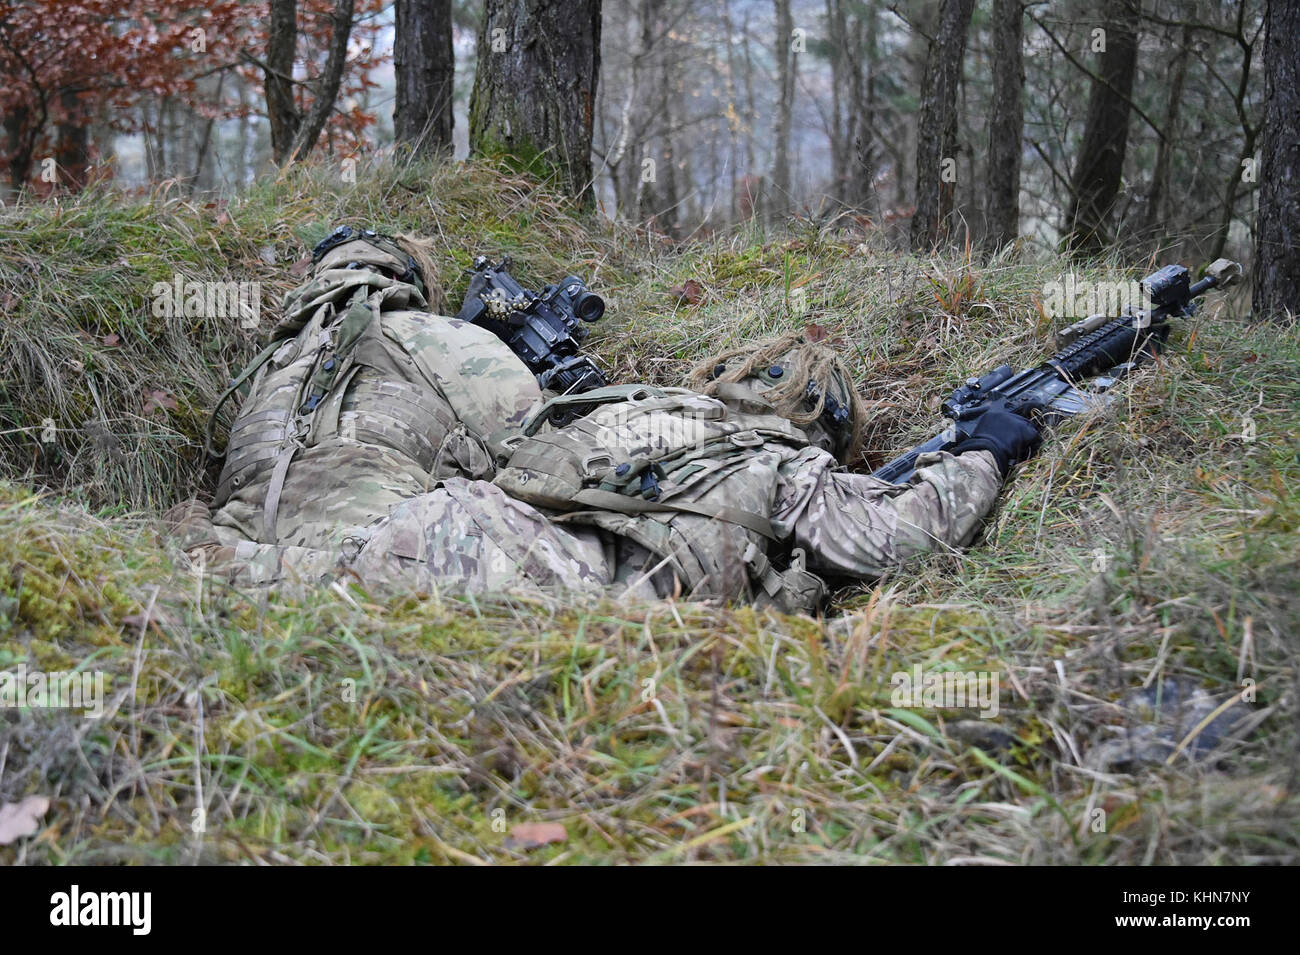 U.S. Soldiers with 1st Squadron, 2nd Cavalry Regiment take cover during Exercise Allied Spirit VII at the 7th Army Training Command’s Hohenfels Training Area, Germany, Nov. 16, 2017. Approximately 4,050 service members from 13 nations are participating in the exercise from Oct. 30 to Nov. 22, 2017. Allied Spirit is a U.S. Army Europe-directed, 7ATC-conducted multinational exercise series designed to develop and enhance NATO and key partner’s interoperability and readiness. (U.S. Army photo by Gertrud Zach) Stock Photo